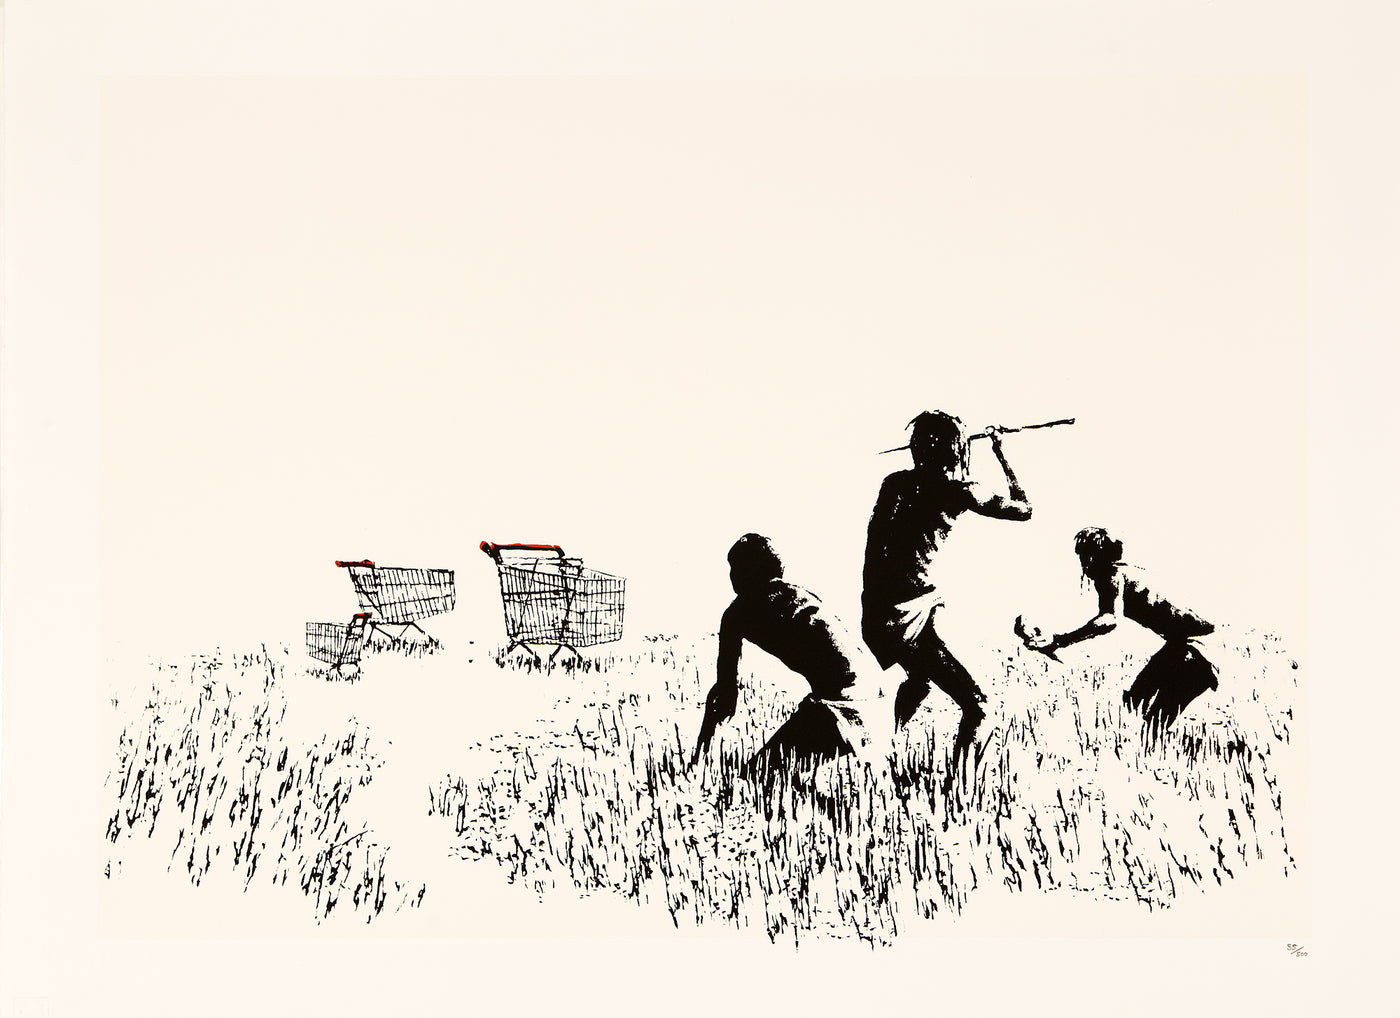 Banksy - Trolleys Black and White - 2006 - Unsigned screen print on paper - Edition of 500 pieces